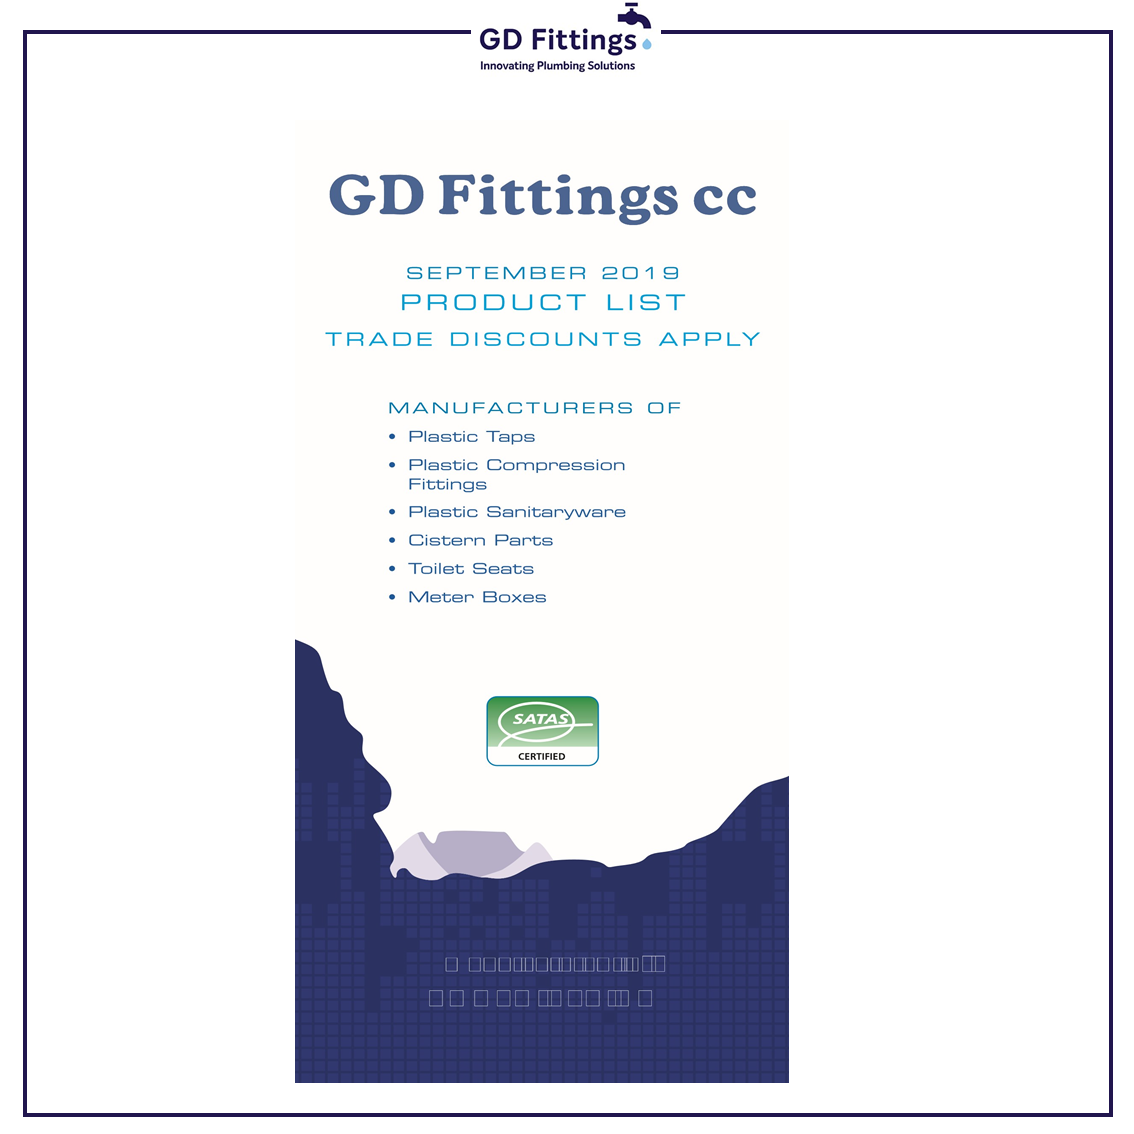 GD-Fittings - Product-List Catalogue